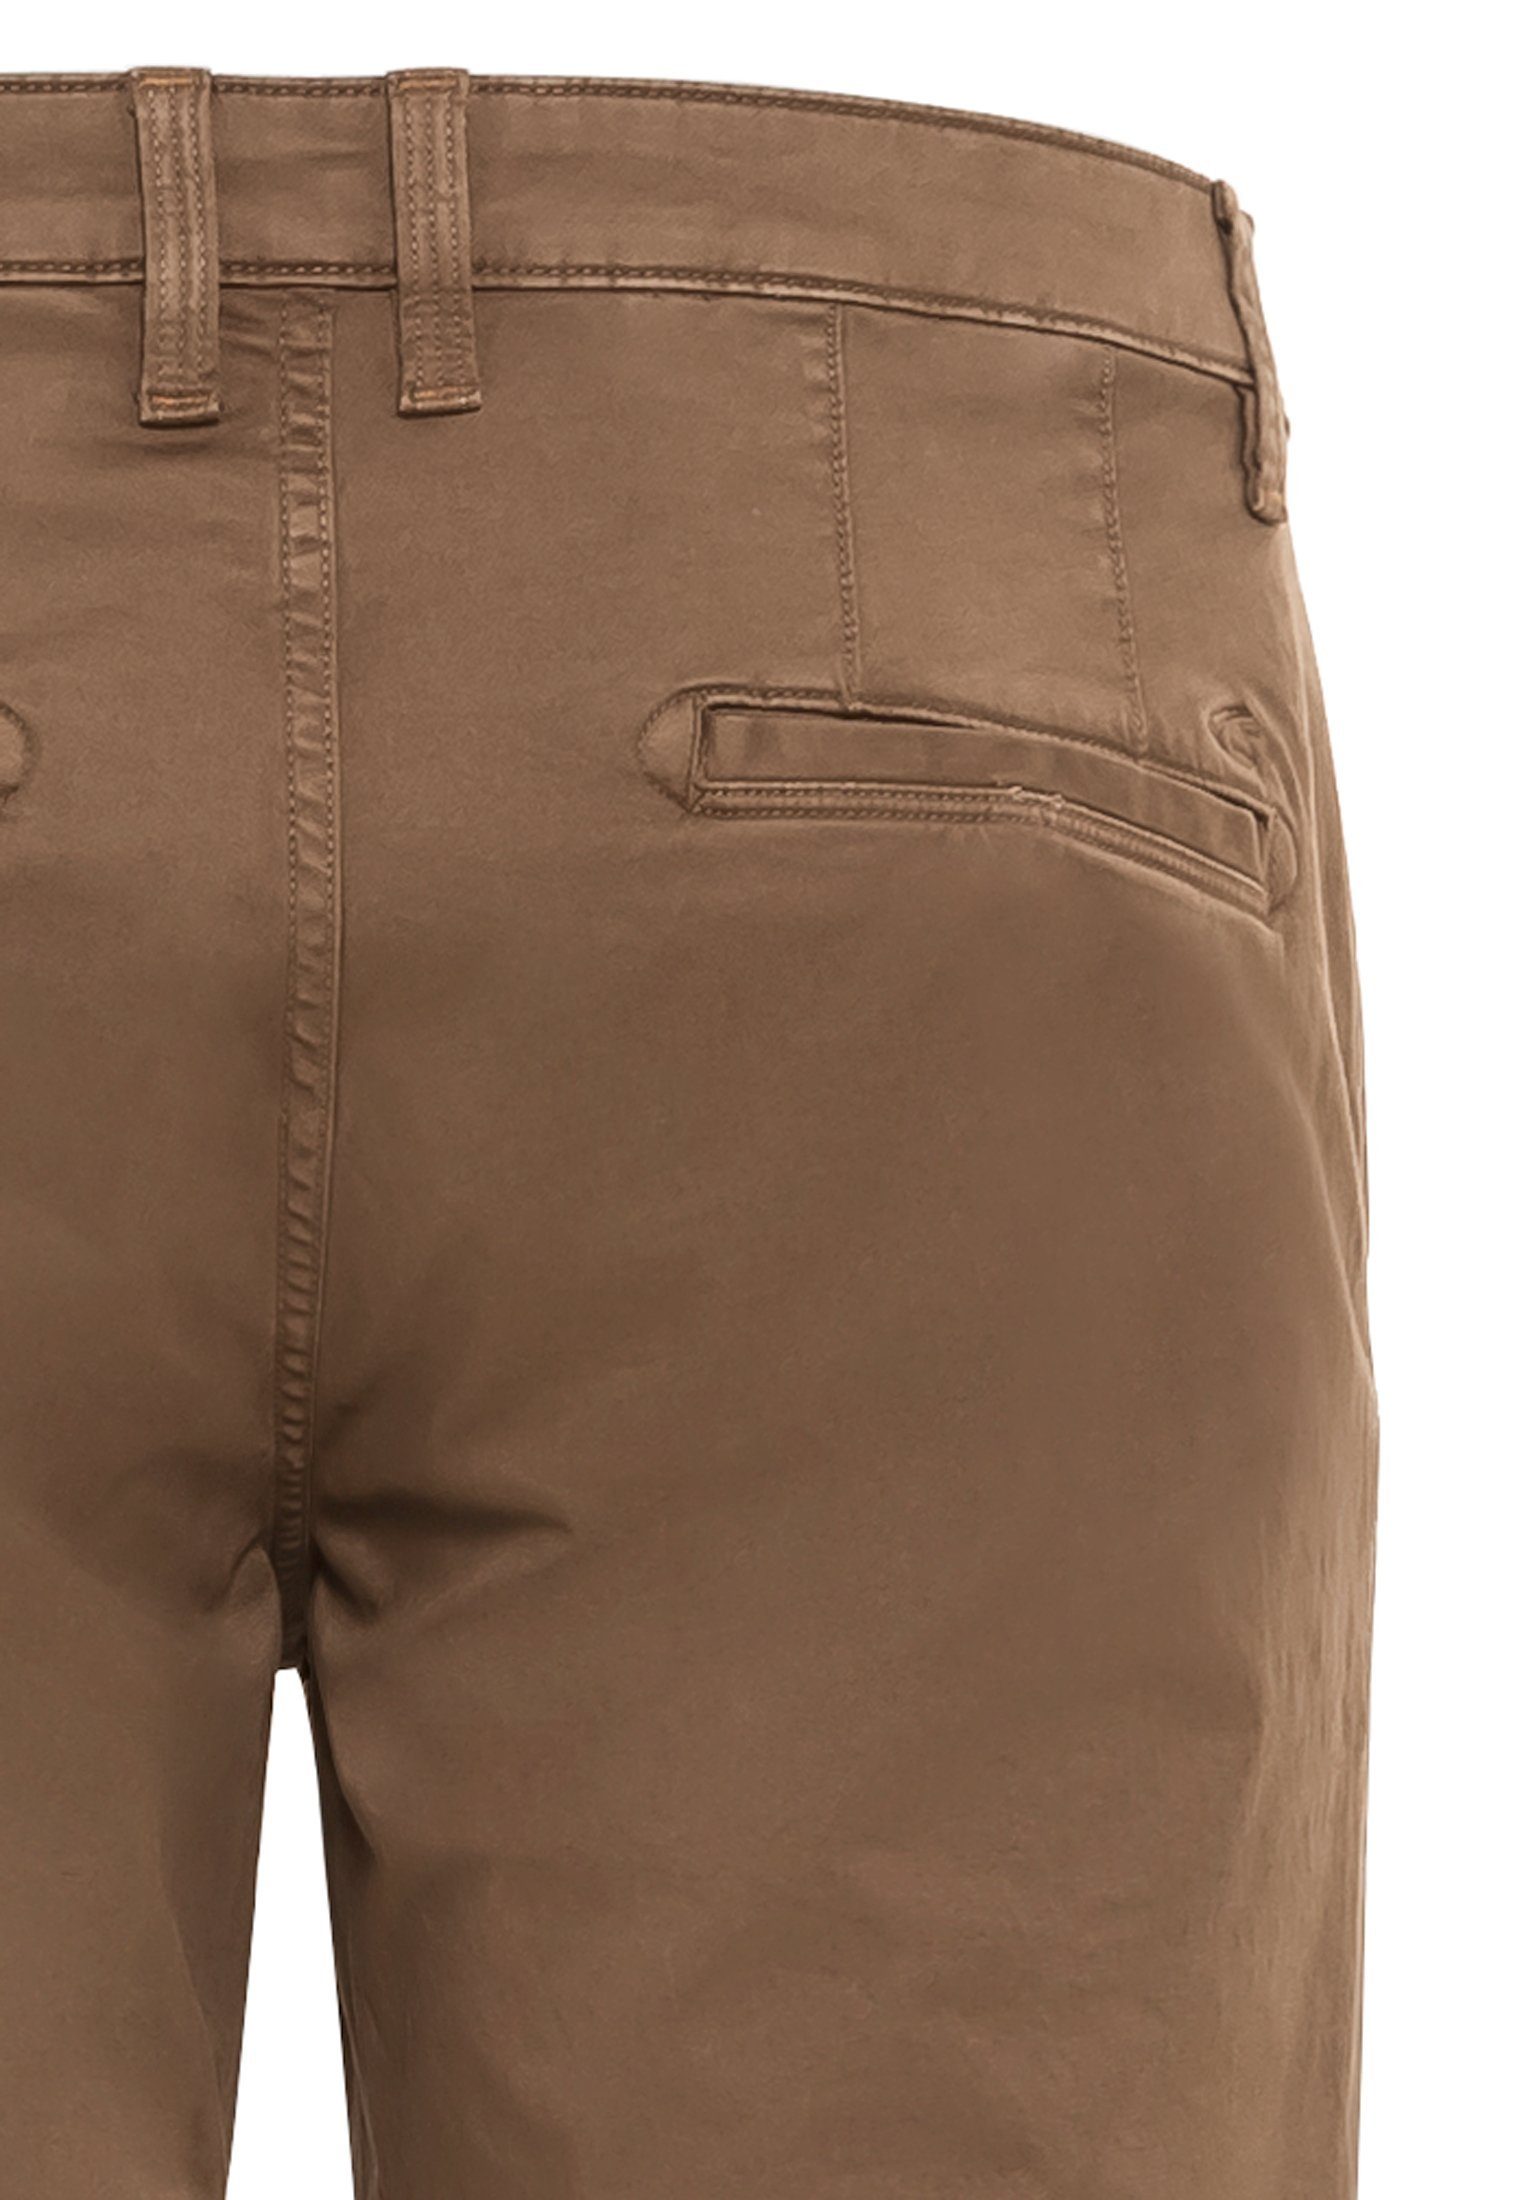 Chinohose Chinohose Garment Dyed Madison camel active Herren active camel